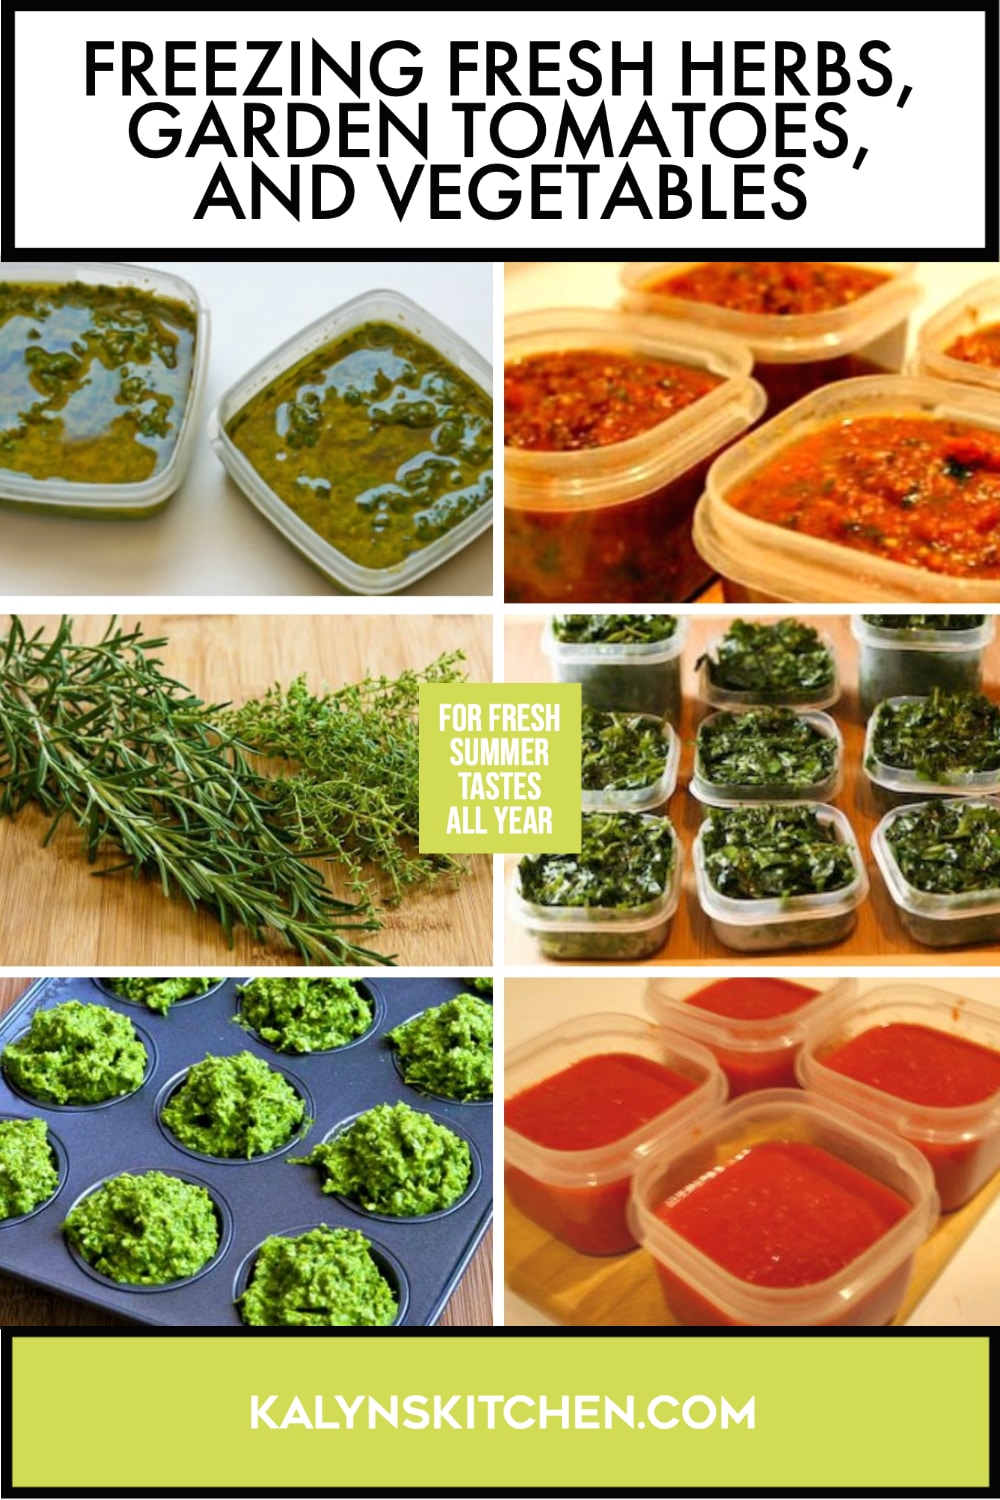 Pinterest image of Freezing Fresh Herbs, Garden Tomatoes, and Vegetables